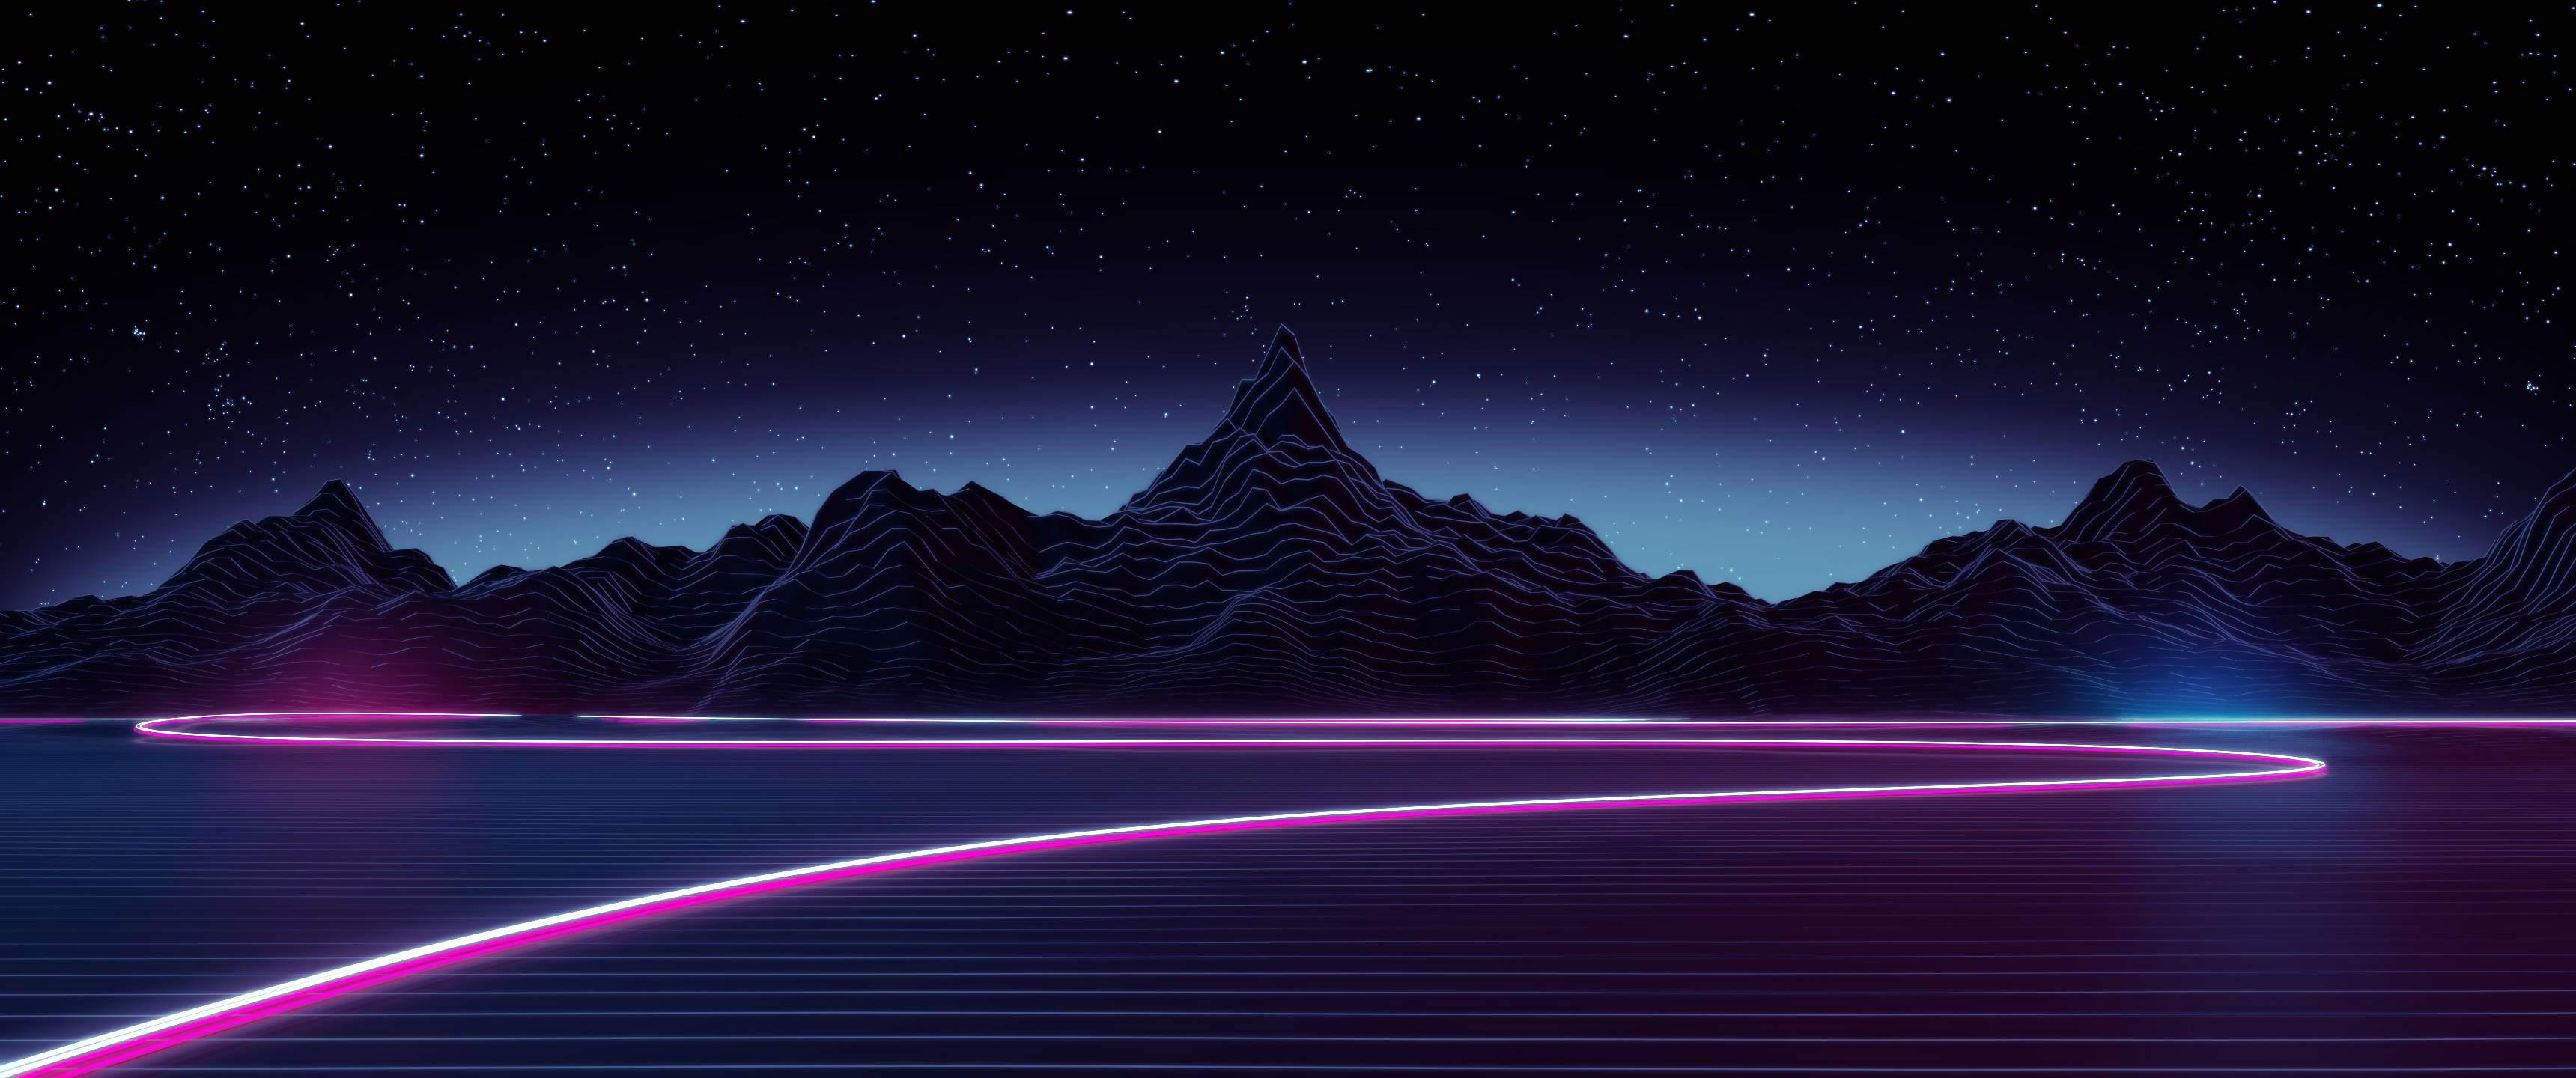 REQUEST Post your 21:9 Retro 80s, Retro Wave, anything